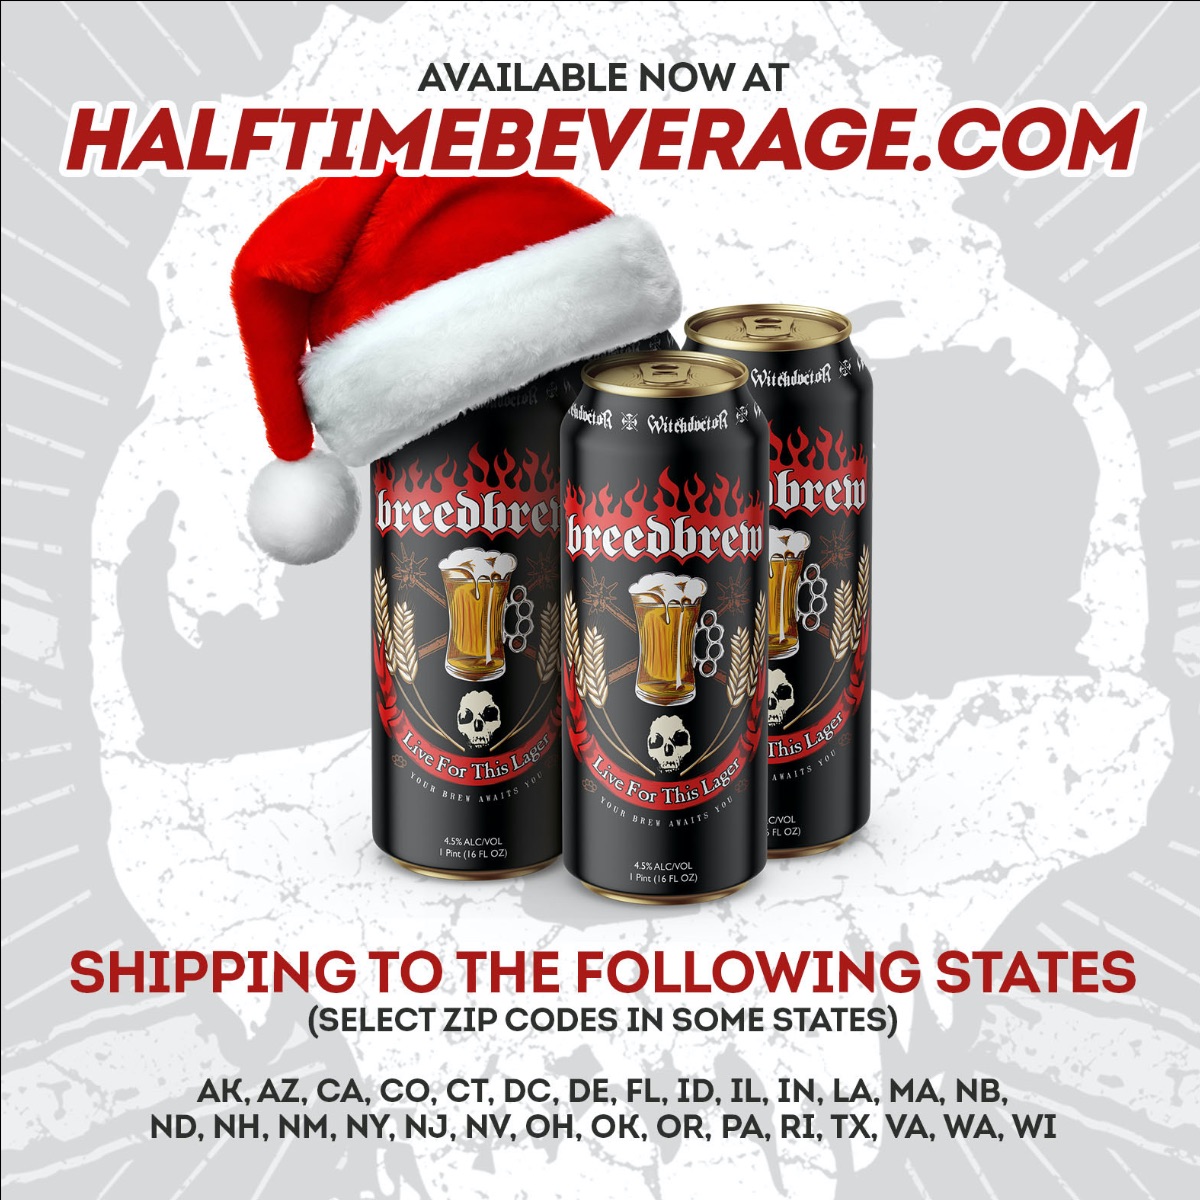 Hatebreed Team Up With Half Time Beverage To Make Live For This Lager More Widely Available